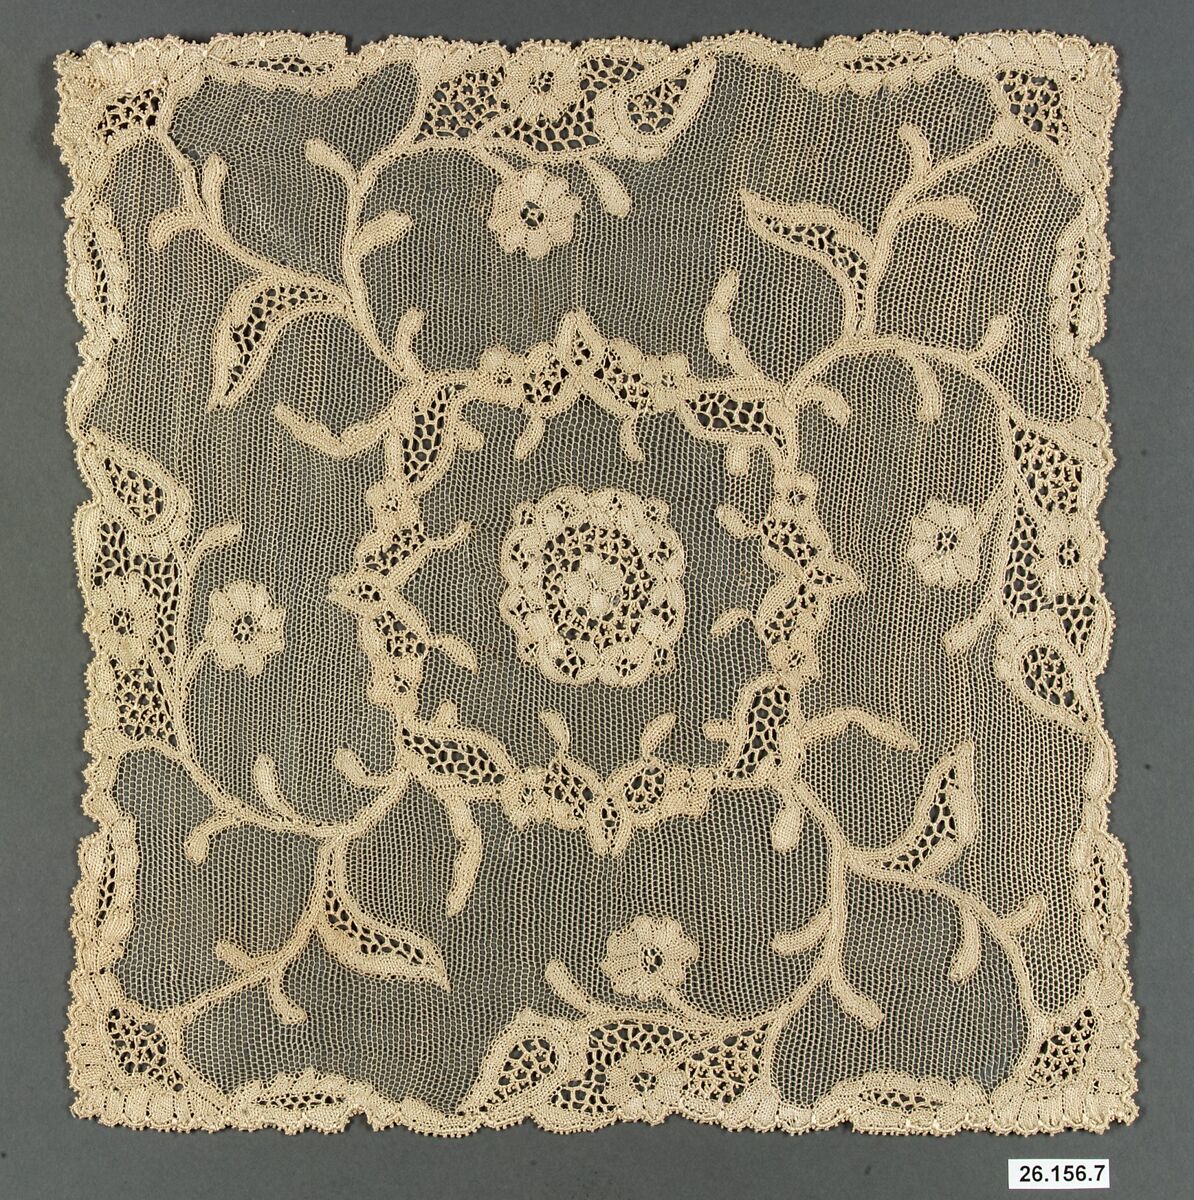 Square (one of three), Needle lace, point d’Alençon, silk, French 